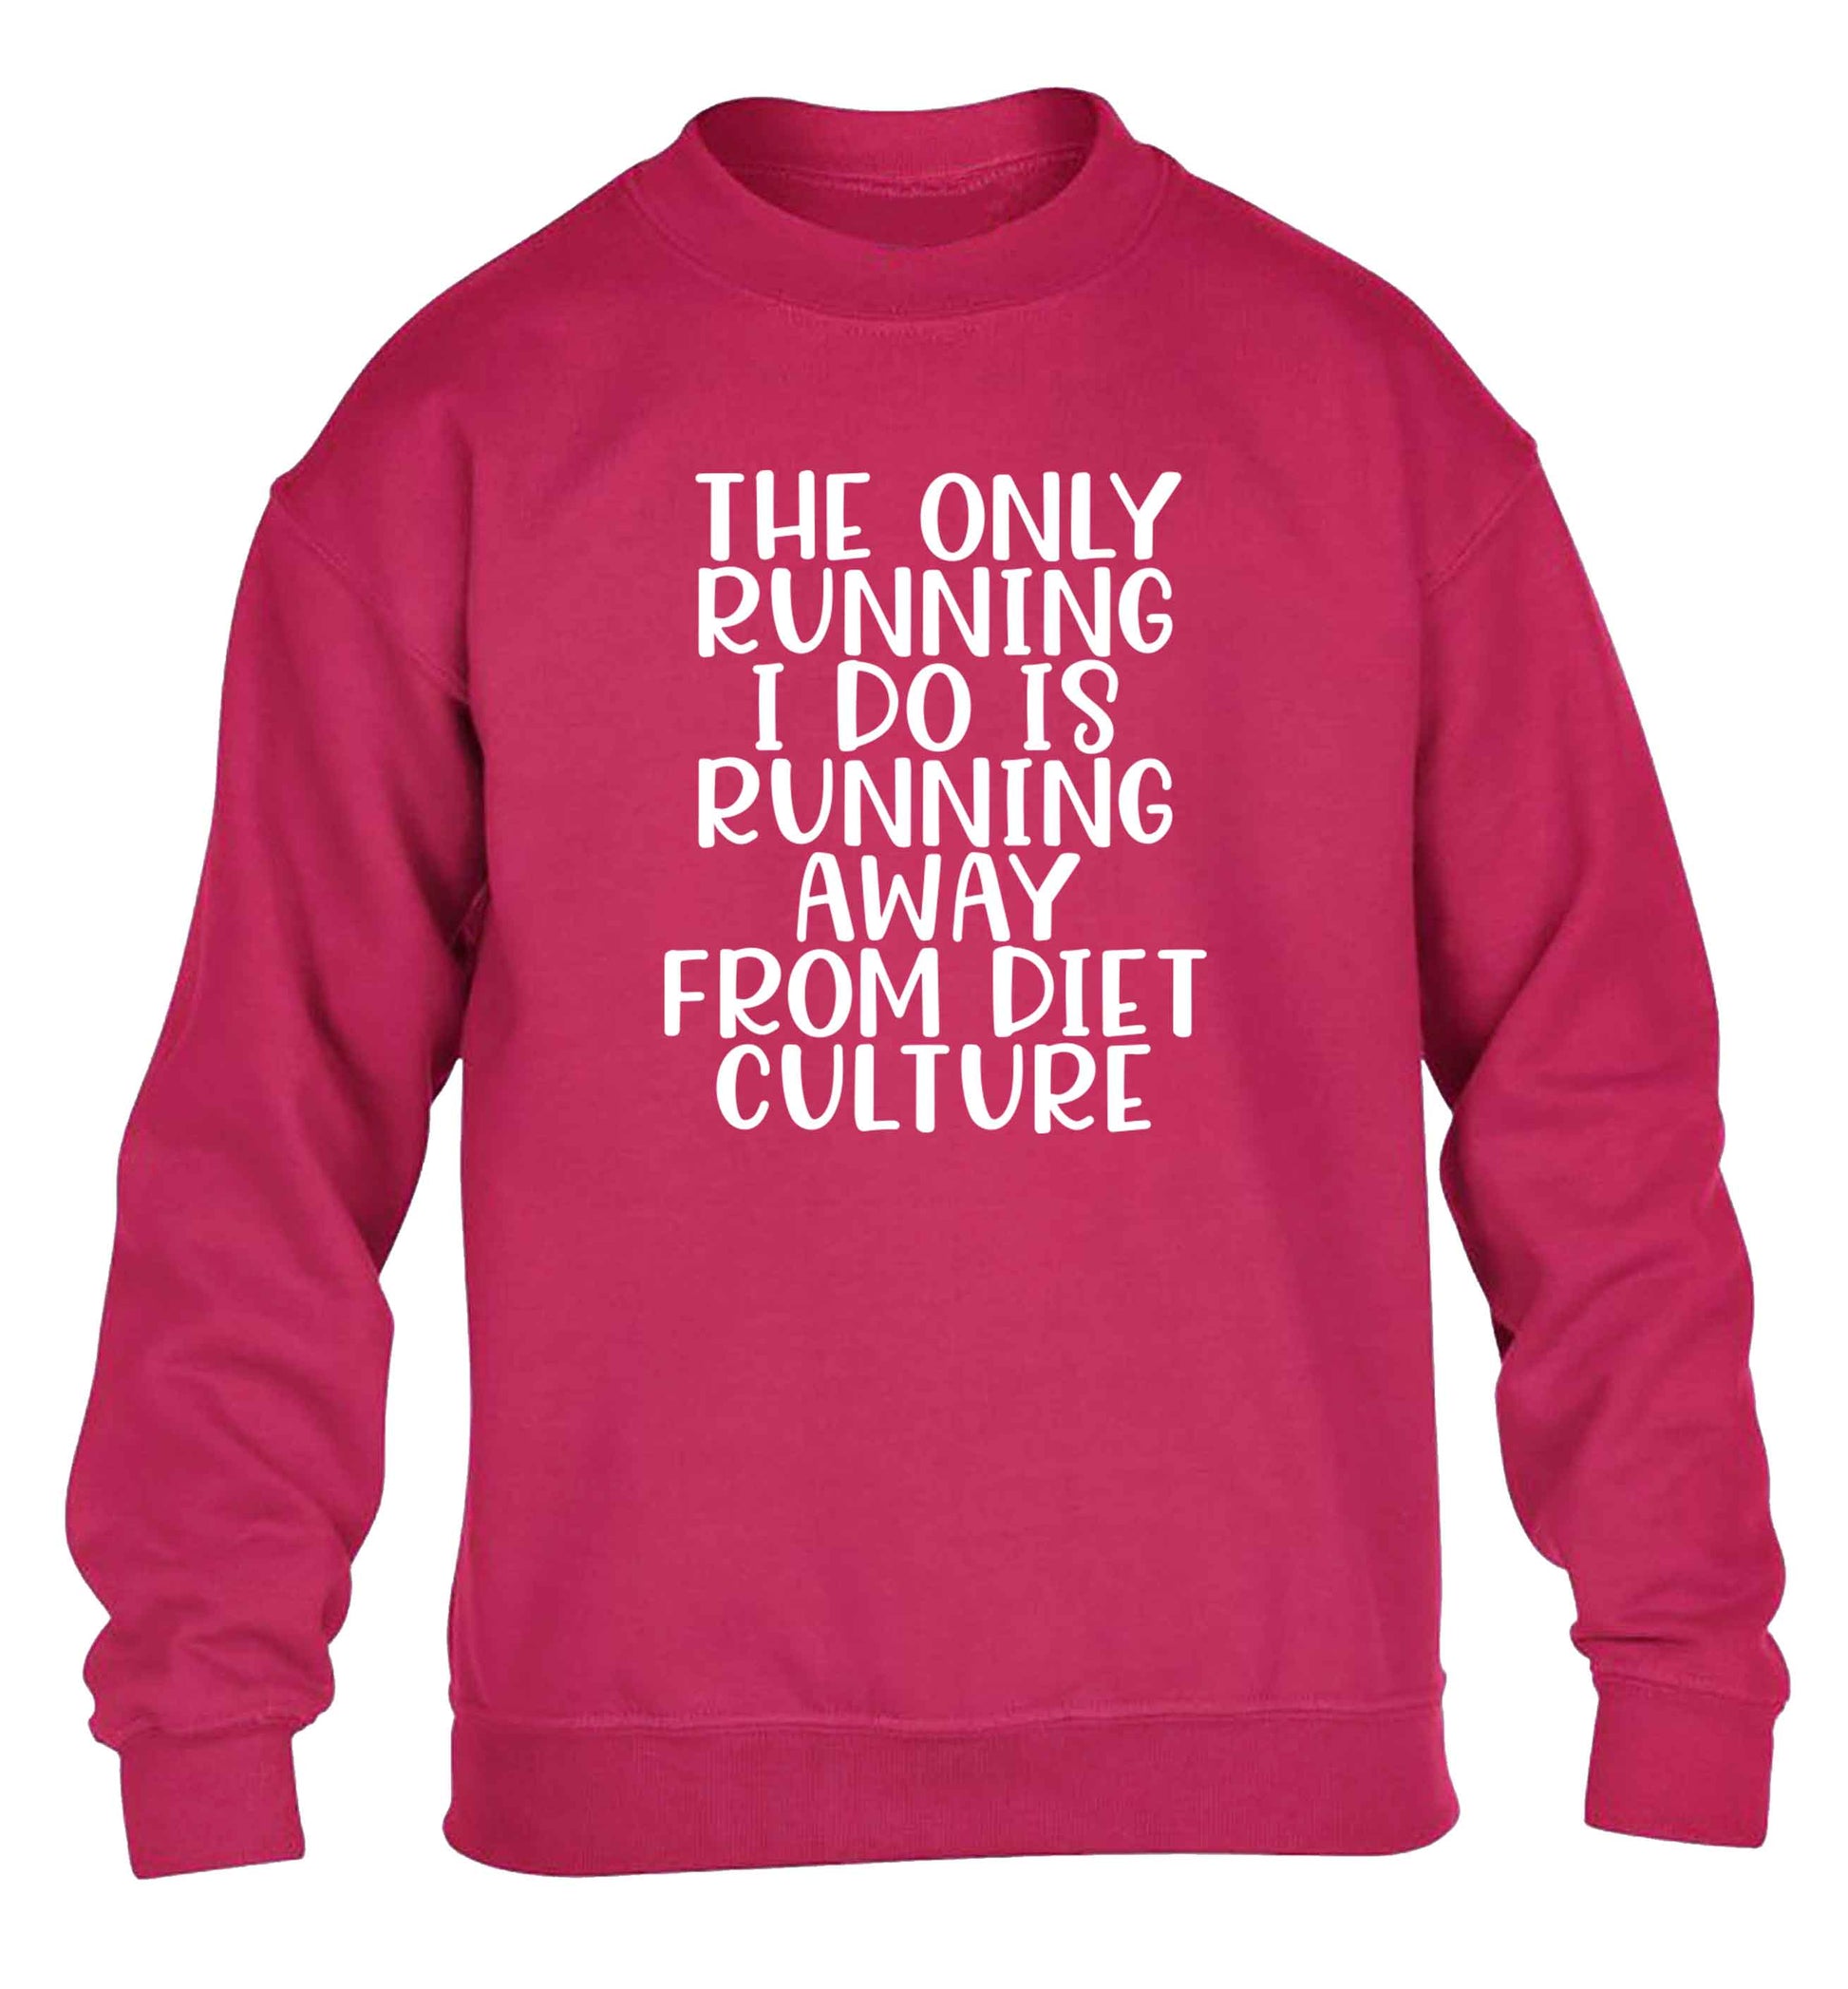 The only running I do is running away from diet culture children's pink sweater 12-13 Years